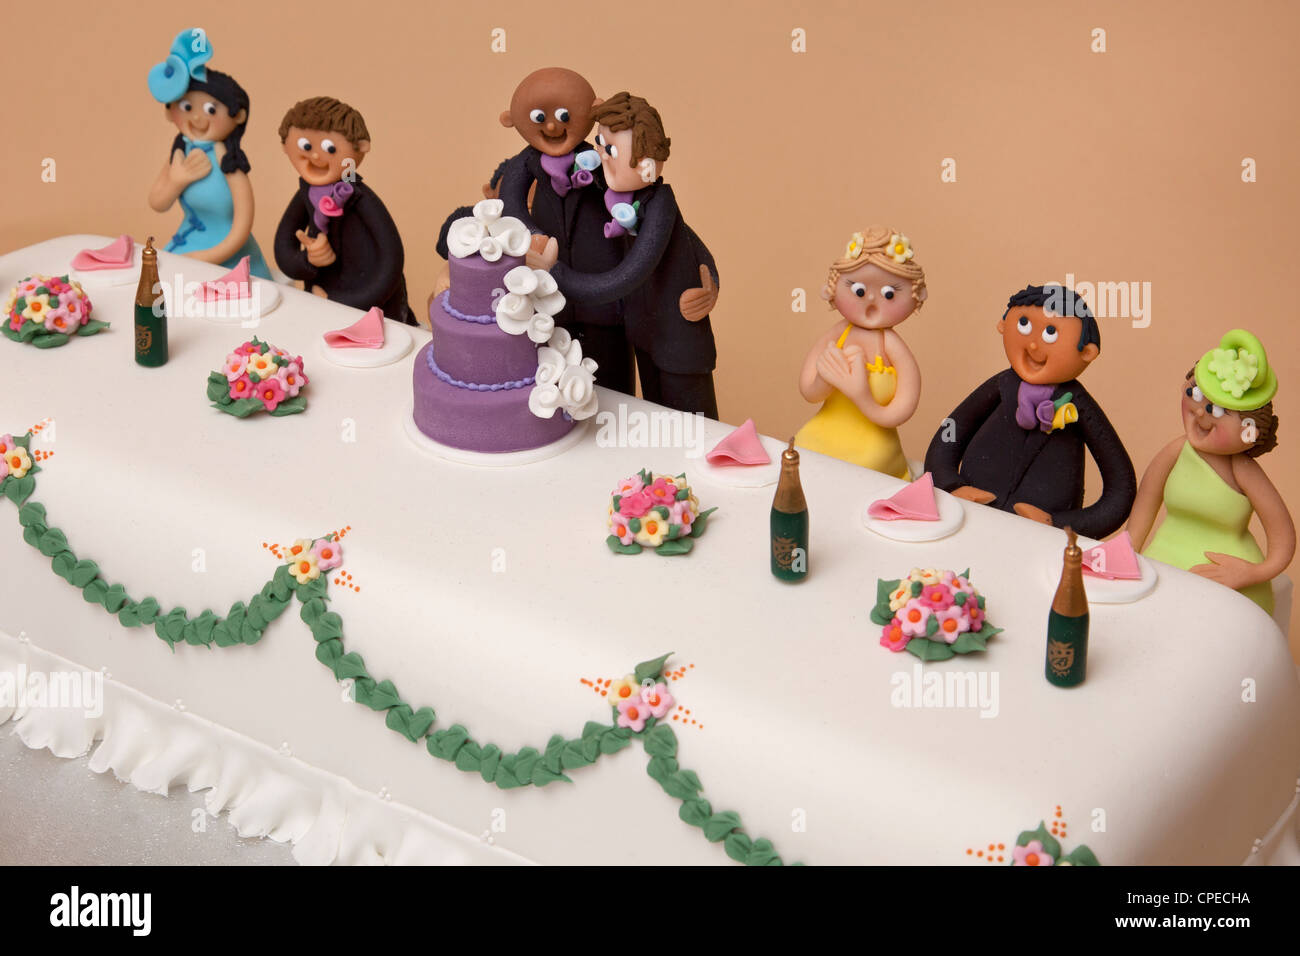 top table wedding cake of gay couples marriage Stock Photo